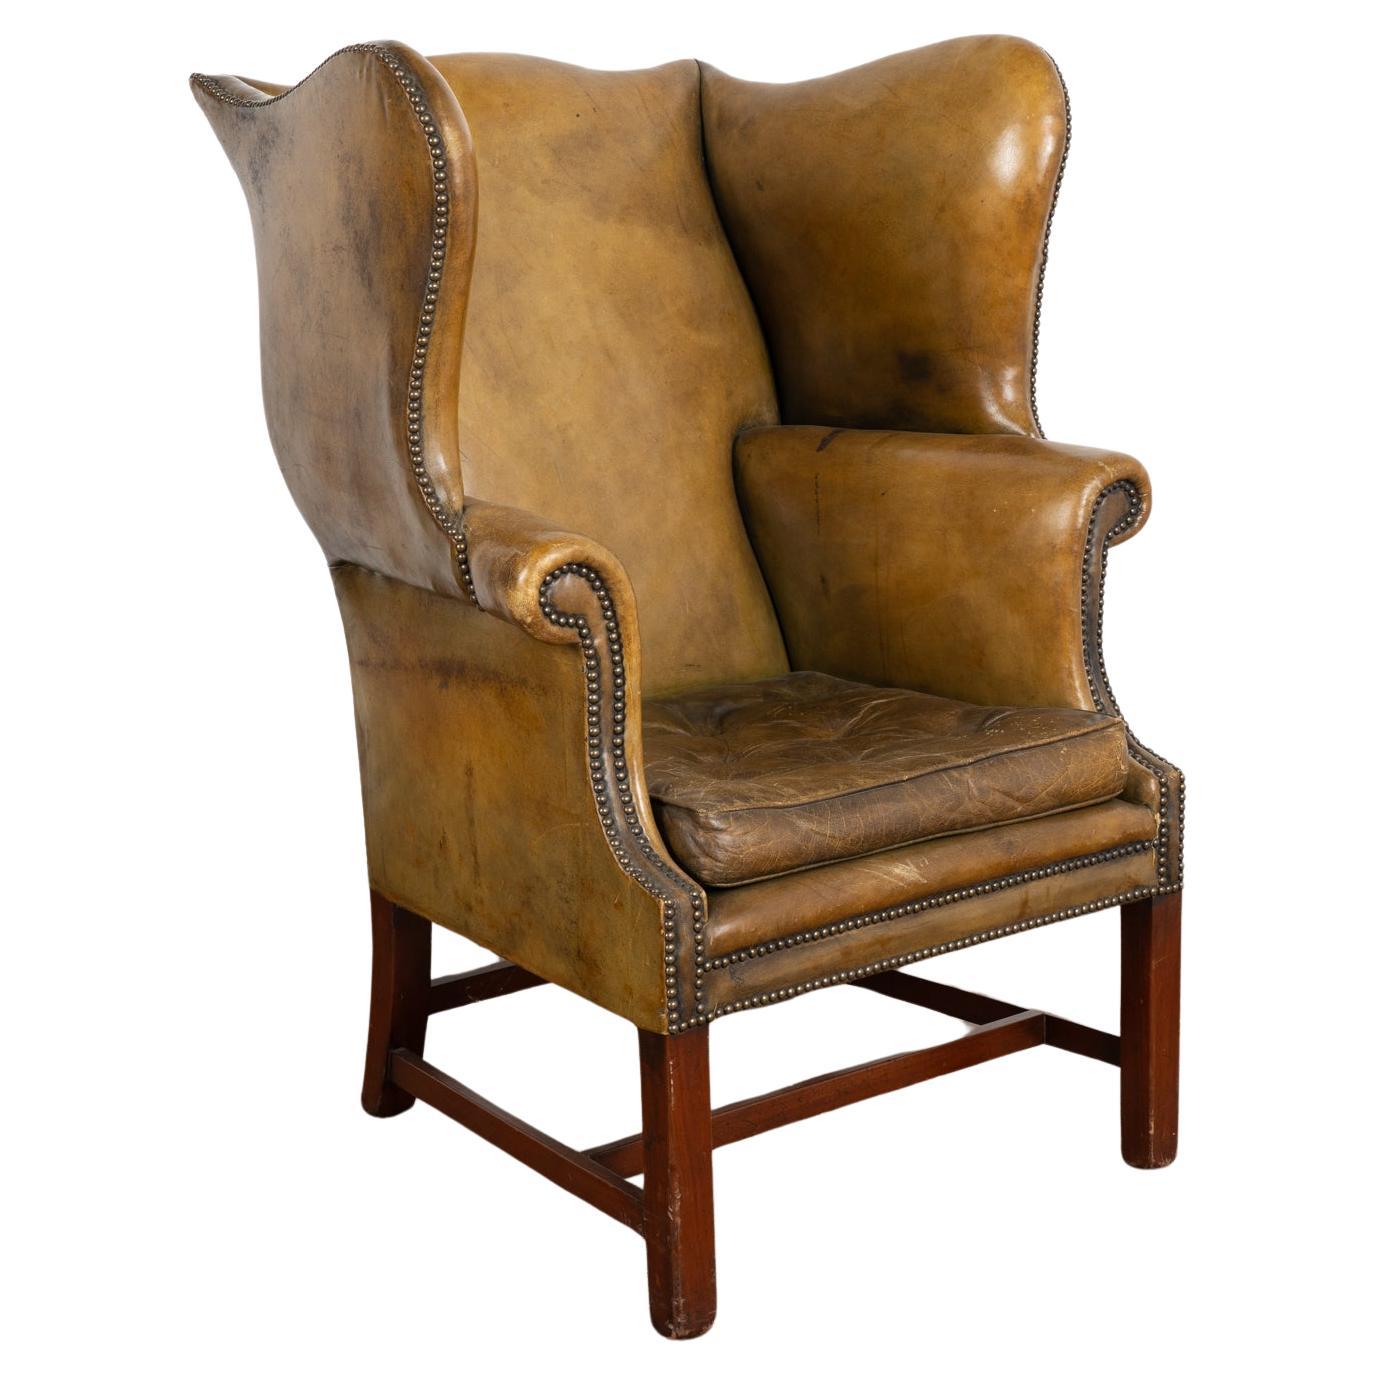 Vintage Olive Green Leather Wingback Armchair, Denmark circa 1960